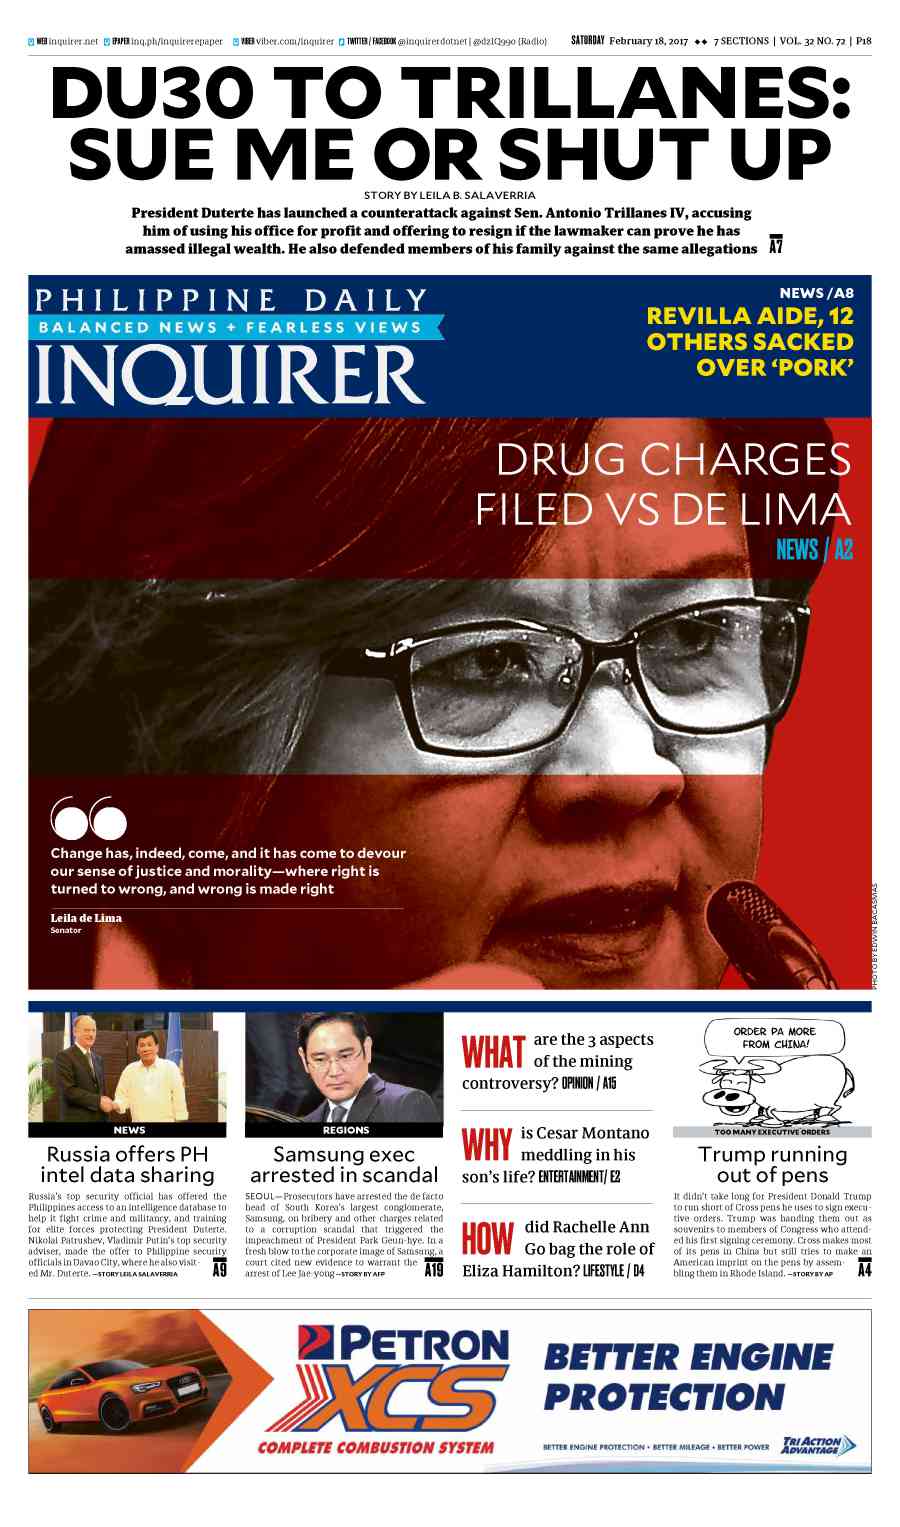 Today S Paper September 4 21 Inquirer Net